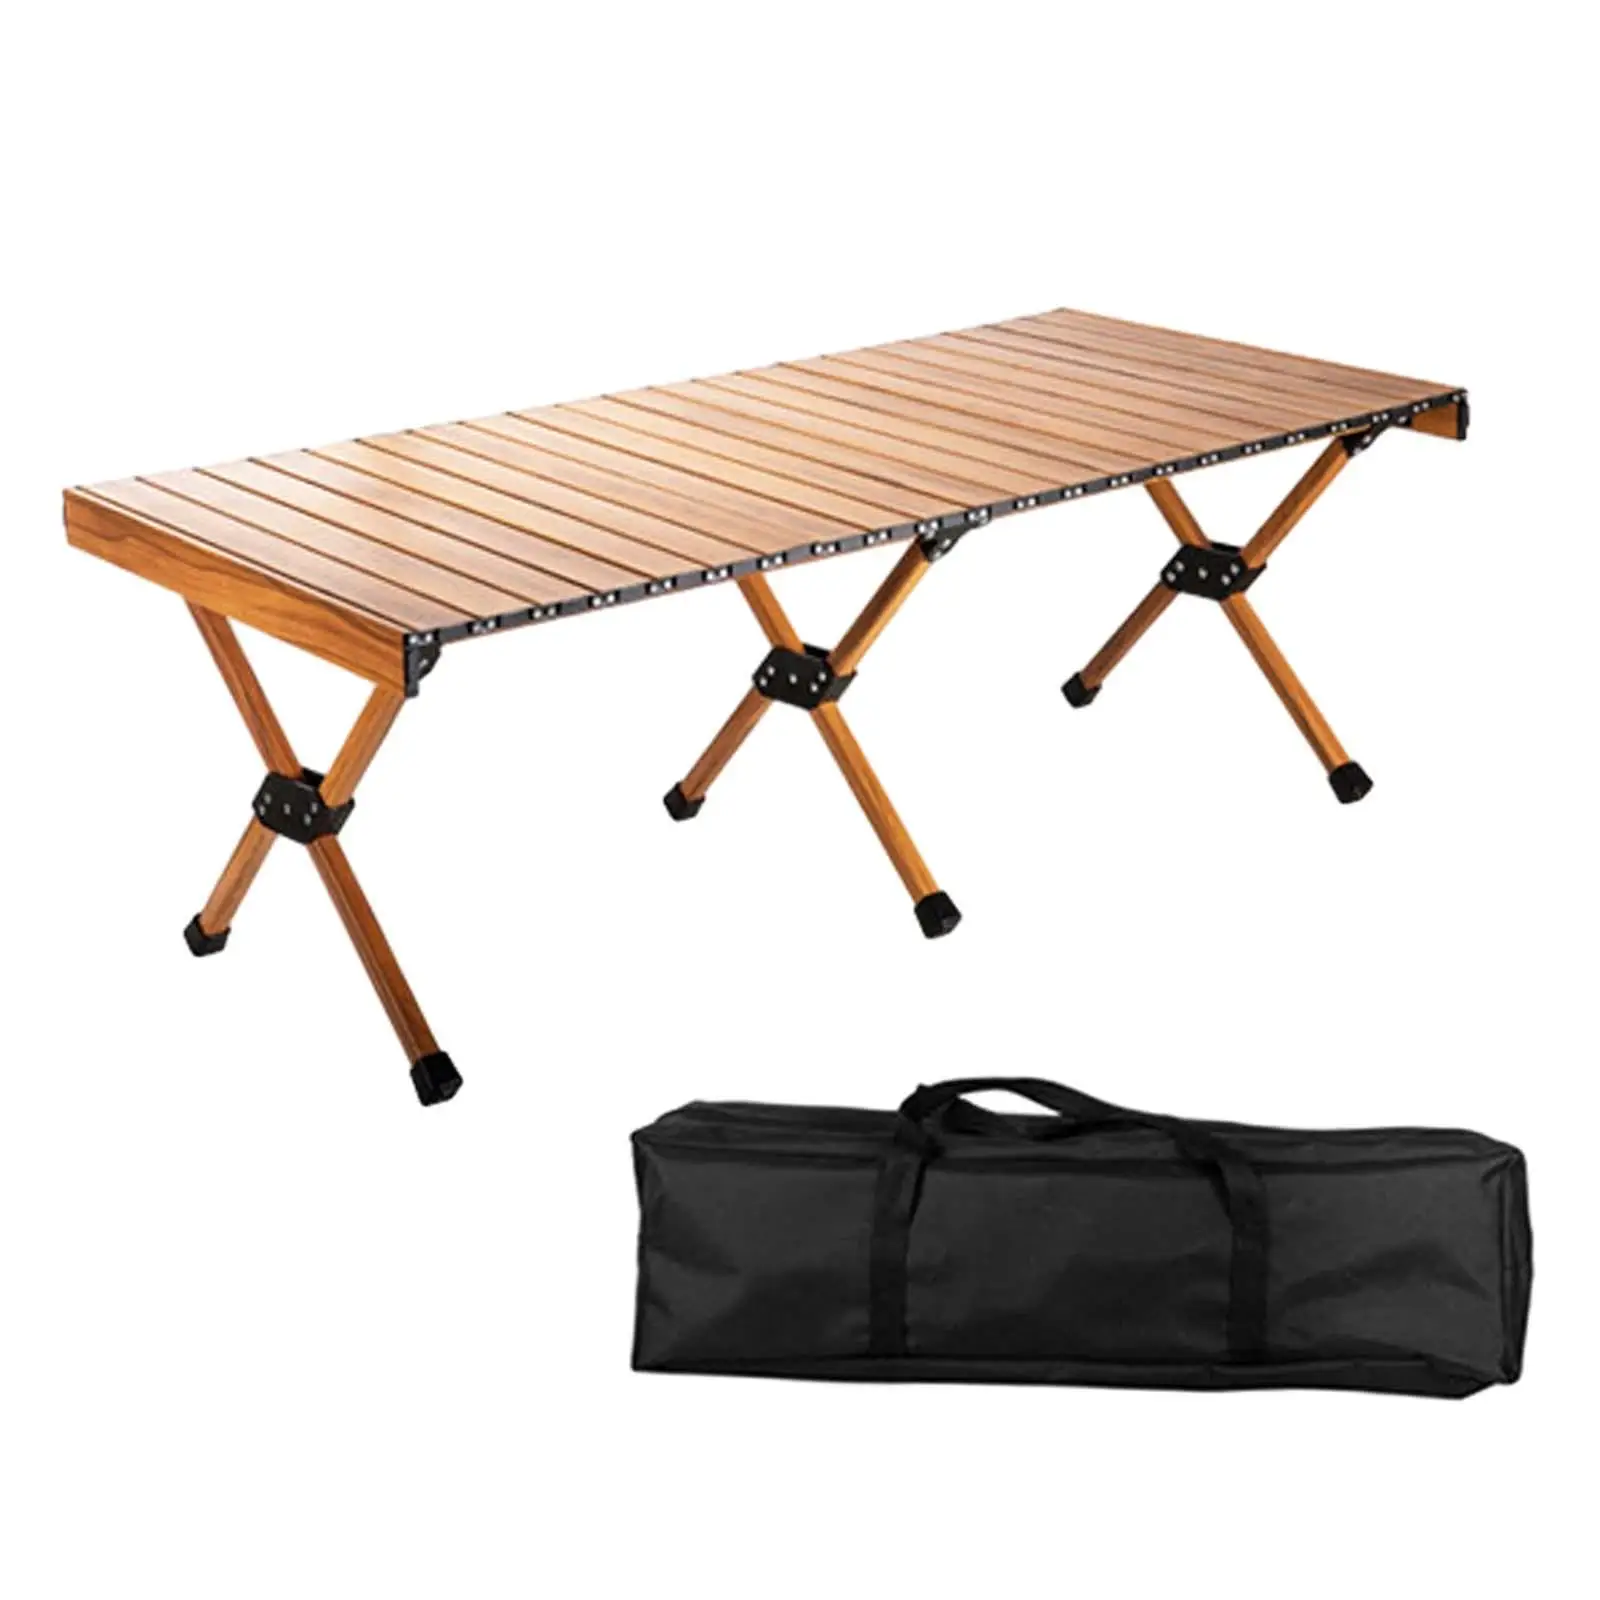 Camping Folding Table Roll up Lightweight Portable for Garden Balcony